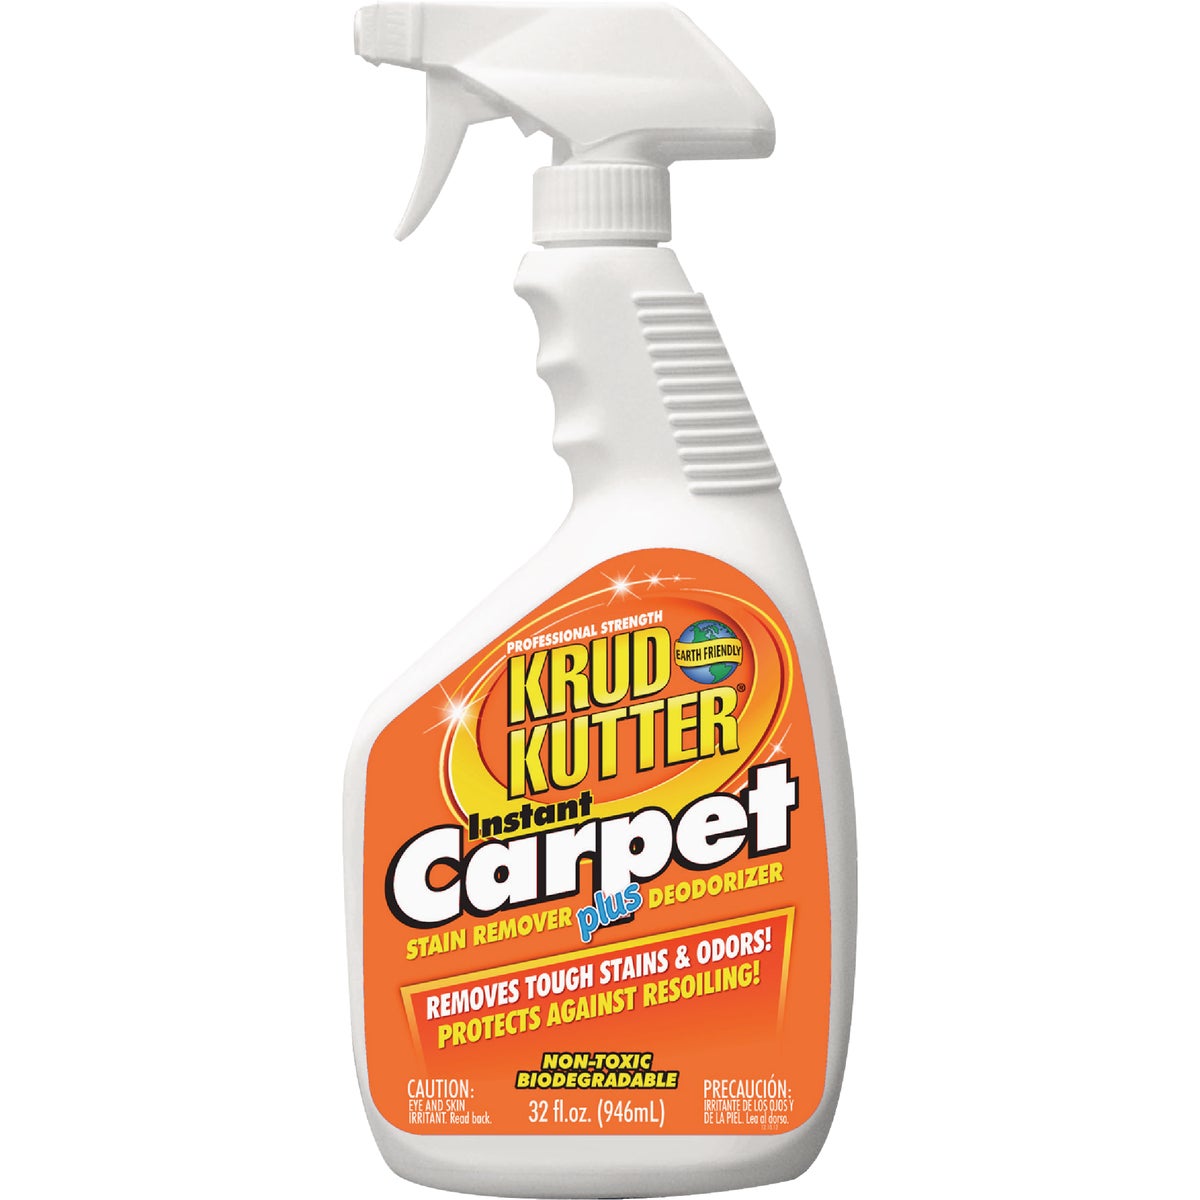 Krud Kutter 32 Oz. Instant Carpet Cleaner Stain Remover and Deodorizer